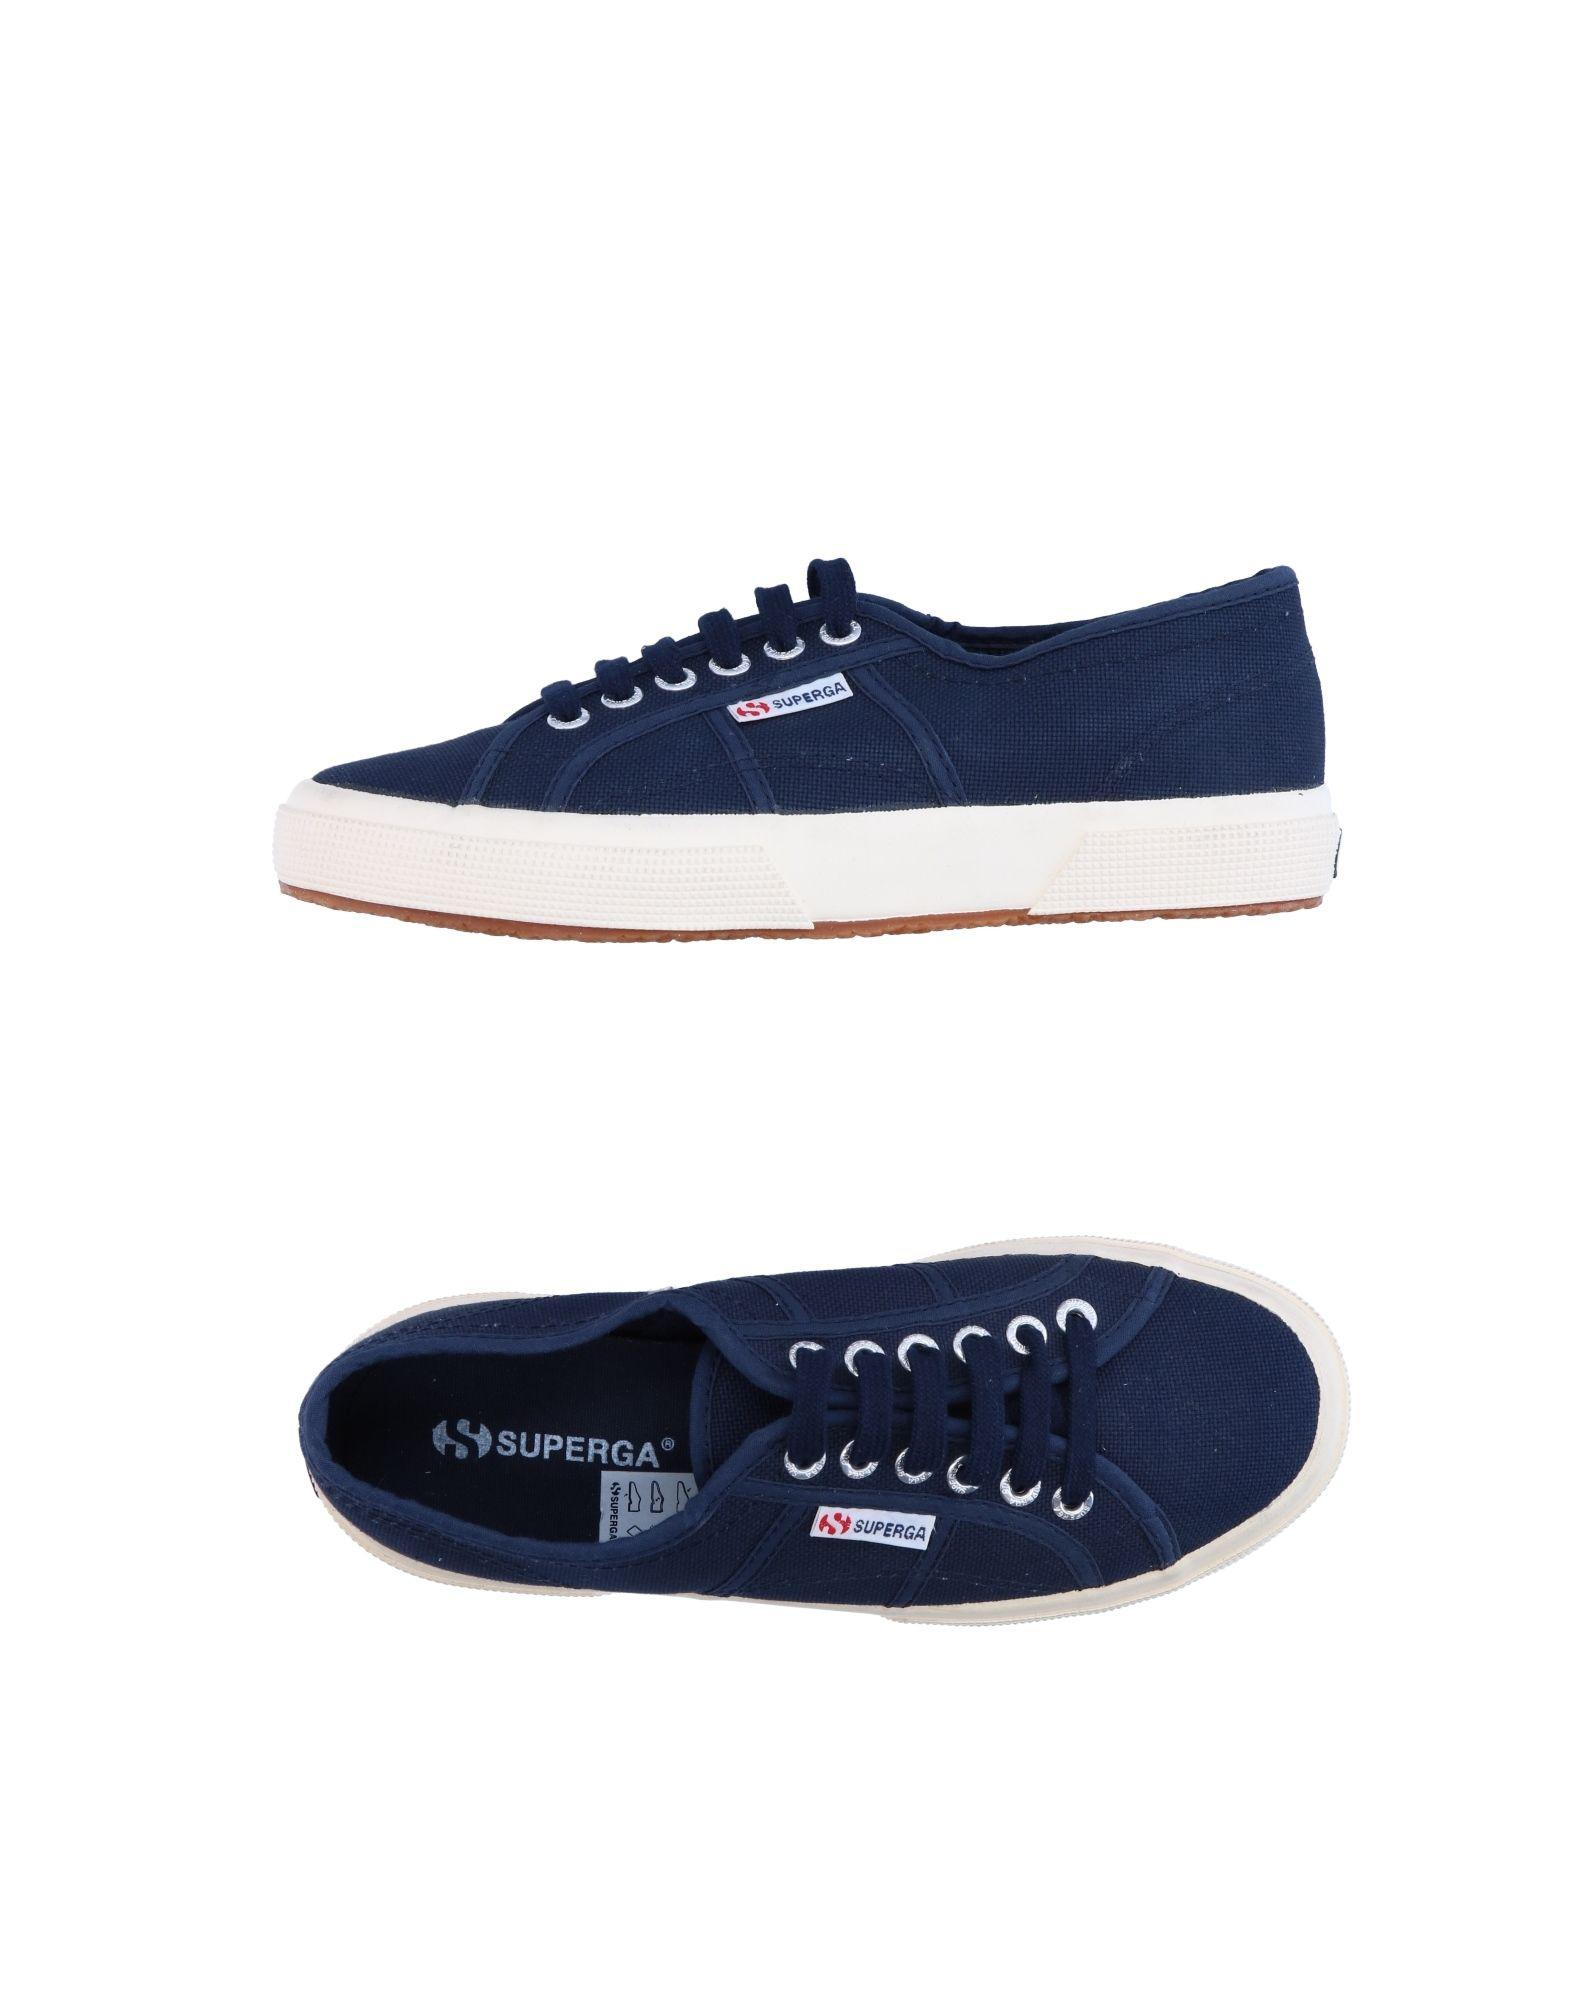 Superga Canvas Low-tops & Sneakers in Dark Blue (Blue) for Men - Lyst